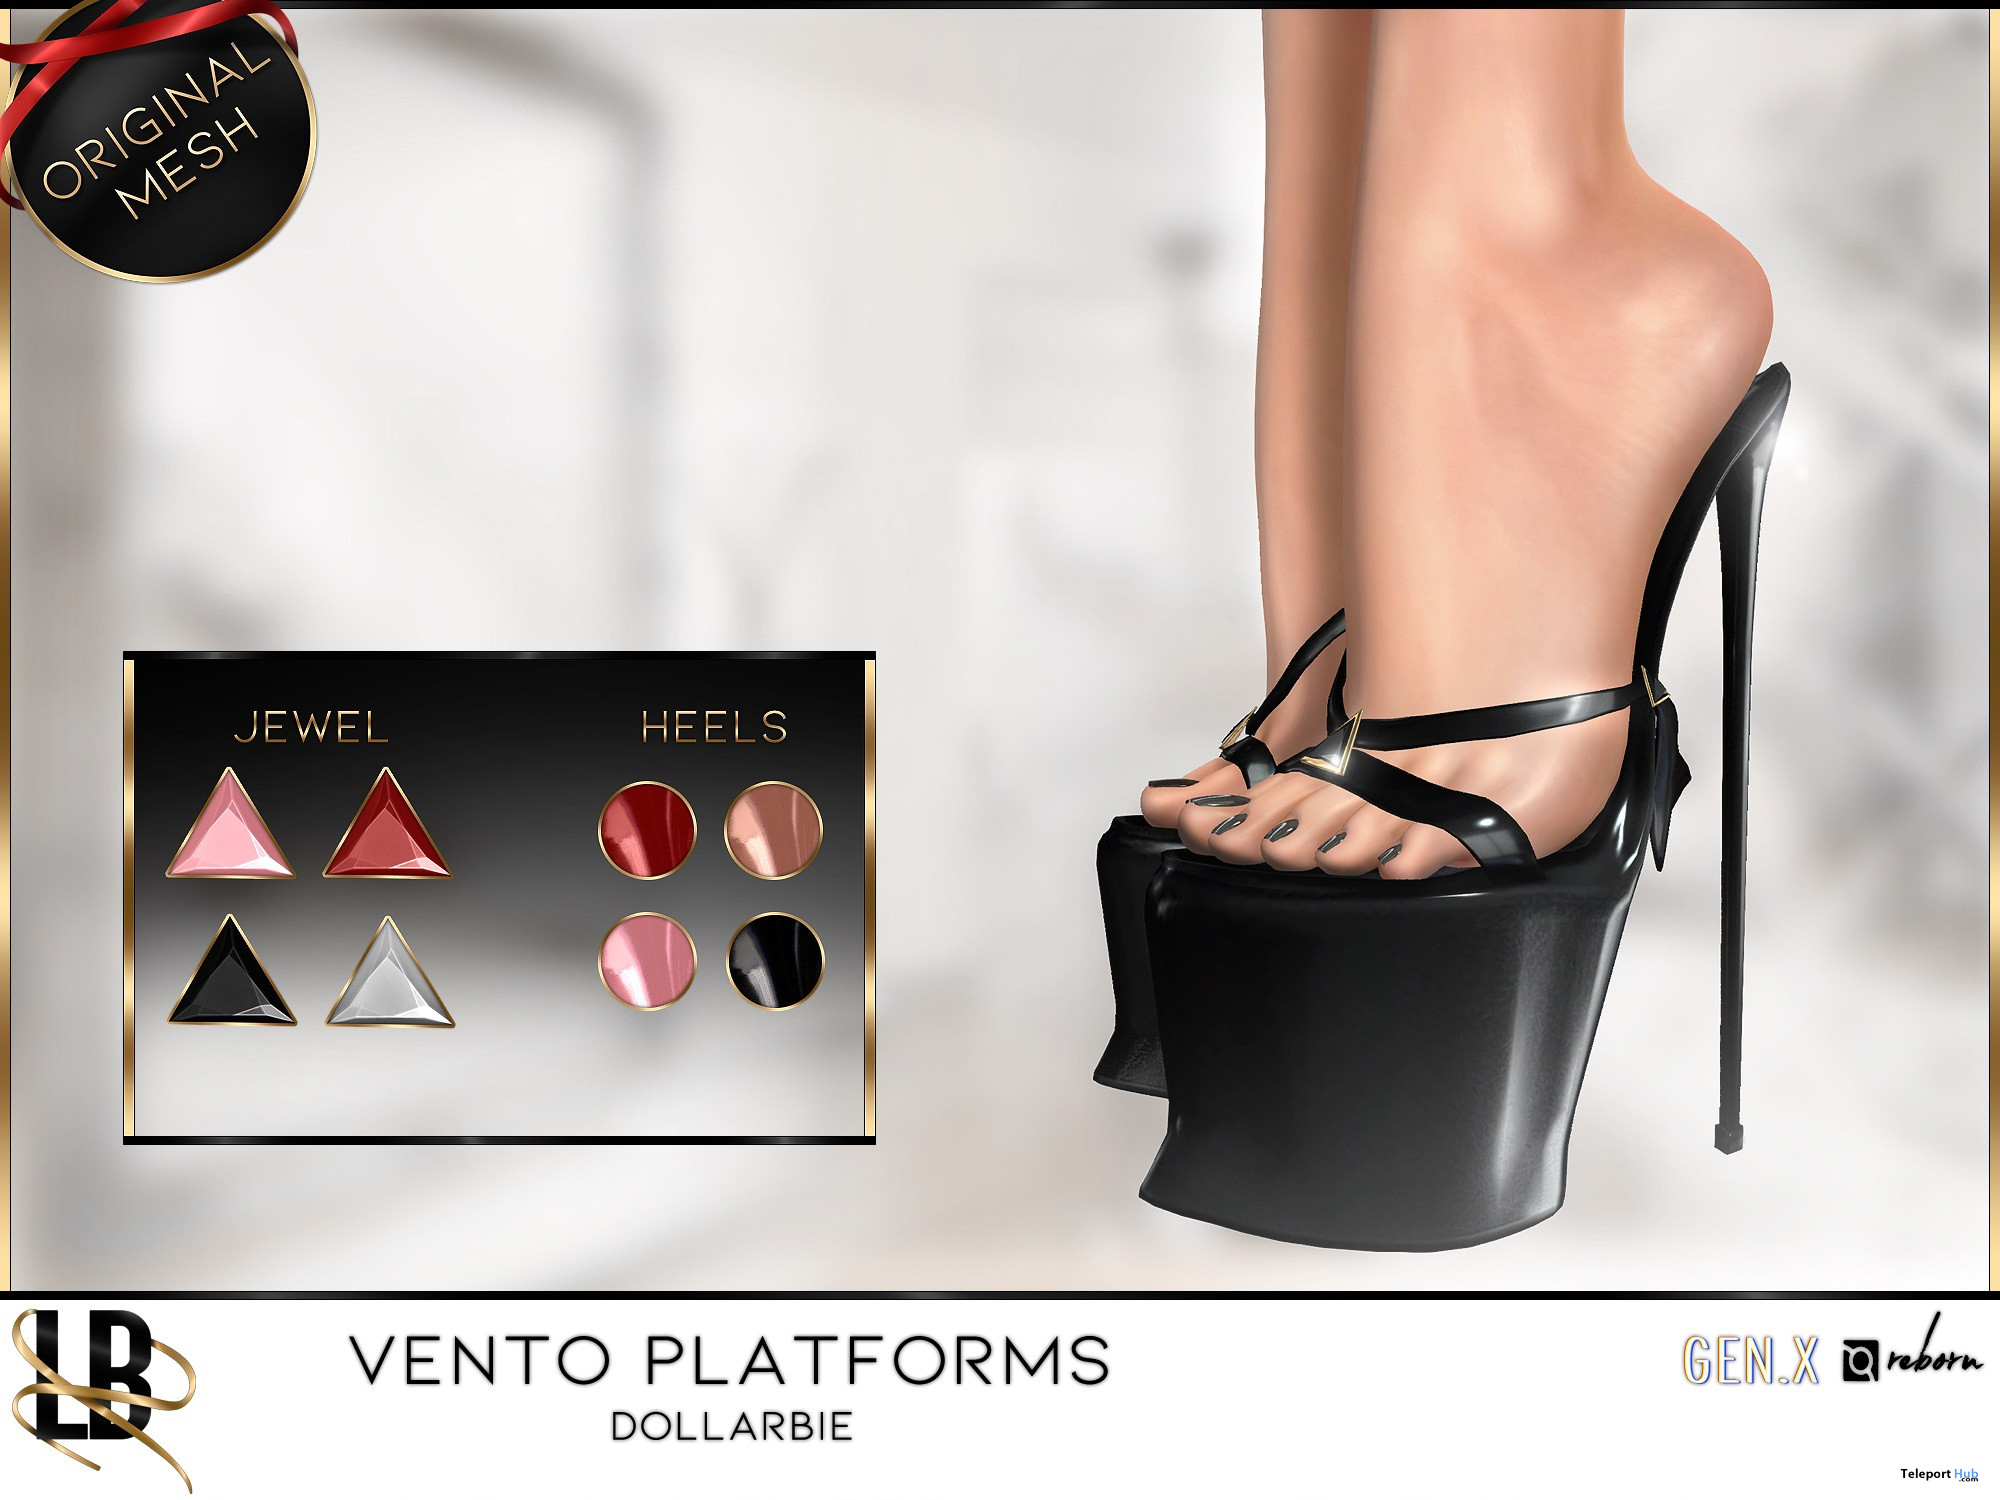 Vento Platforms 1L Promo Gift by LACEY BABES - Teleport Hub - teleporthub.com